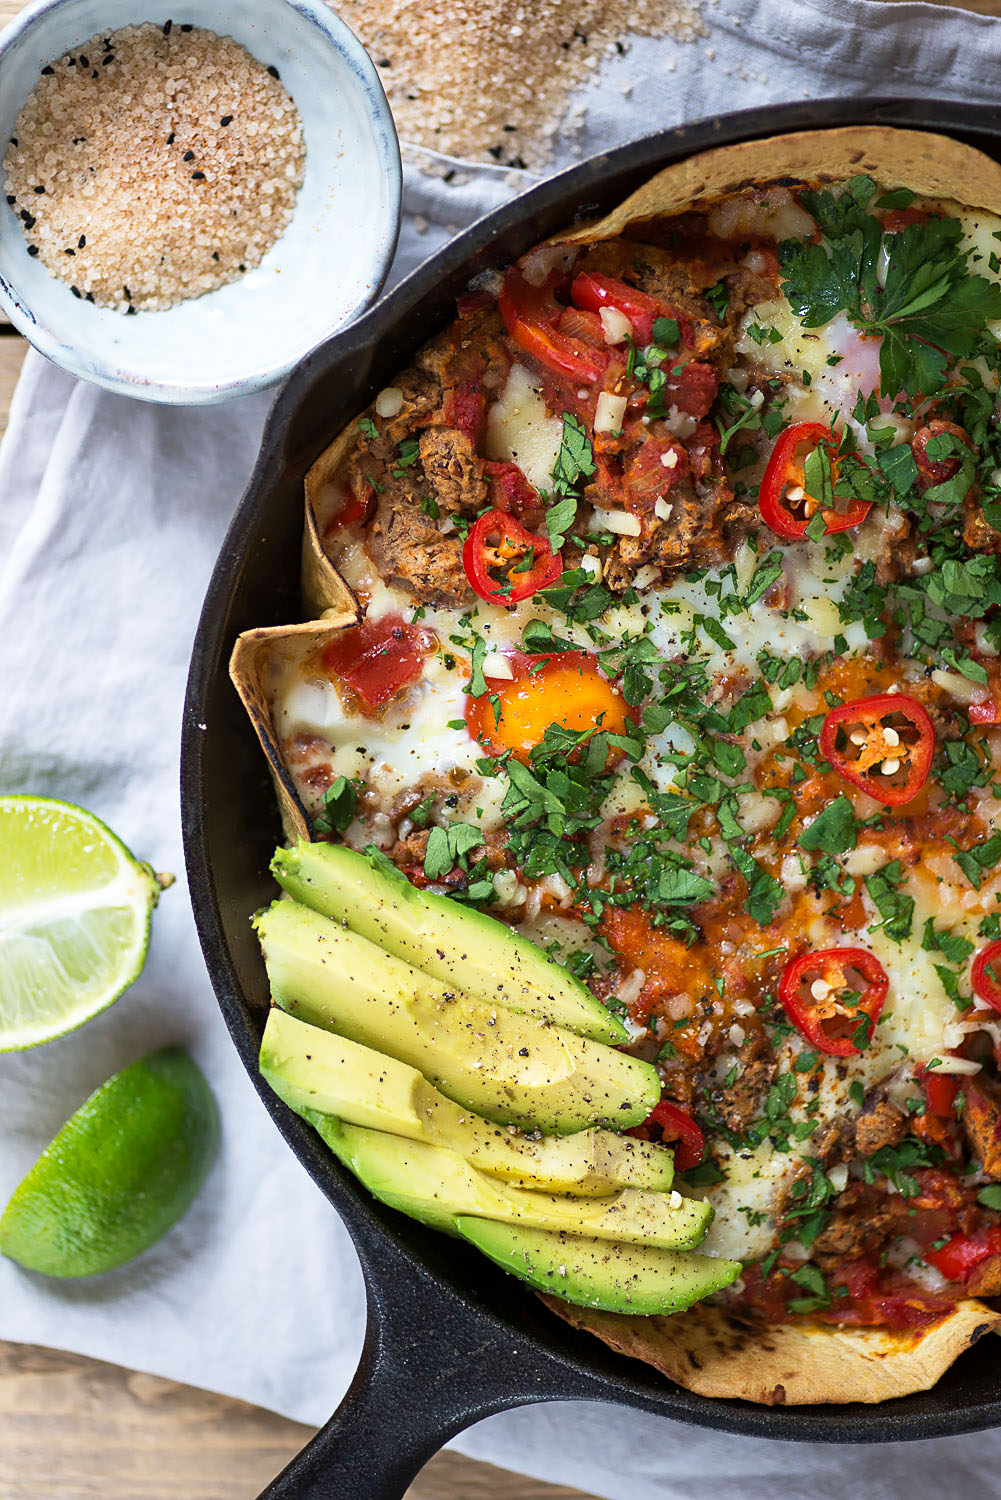 Baked Huevos Rancheros with British Lion Eggs, Refried Black Beans and Avocado